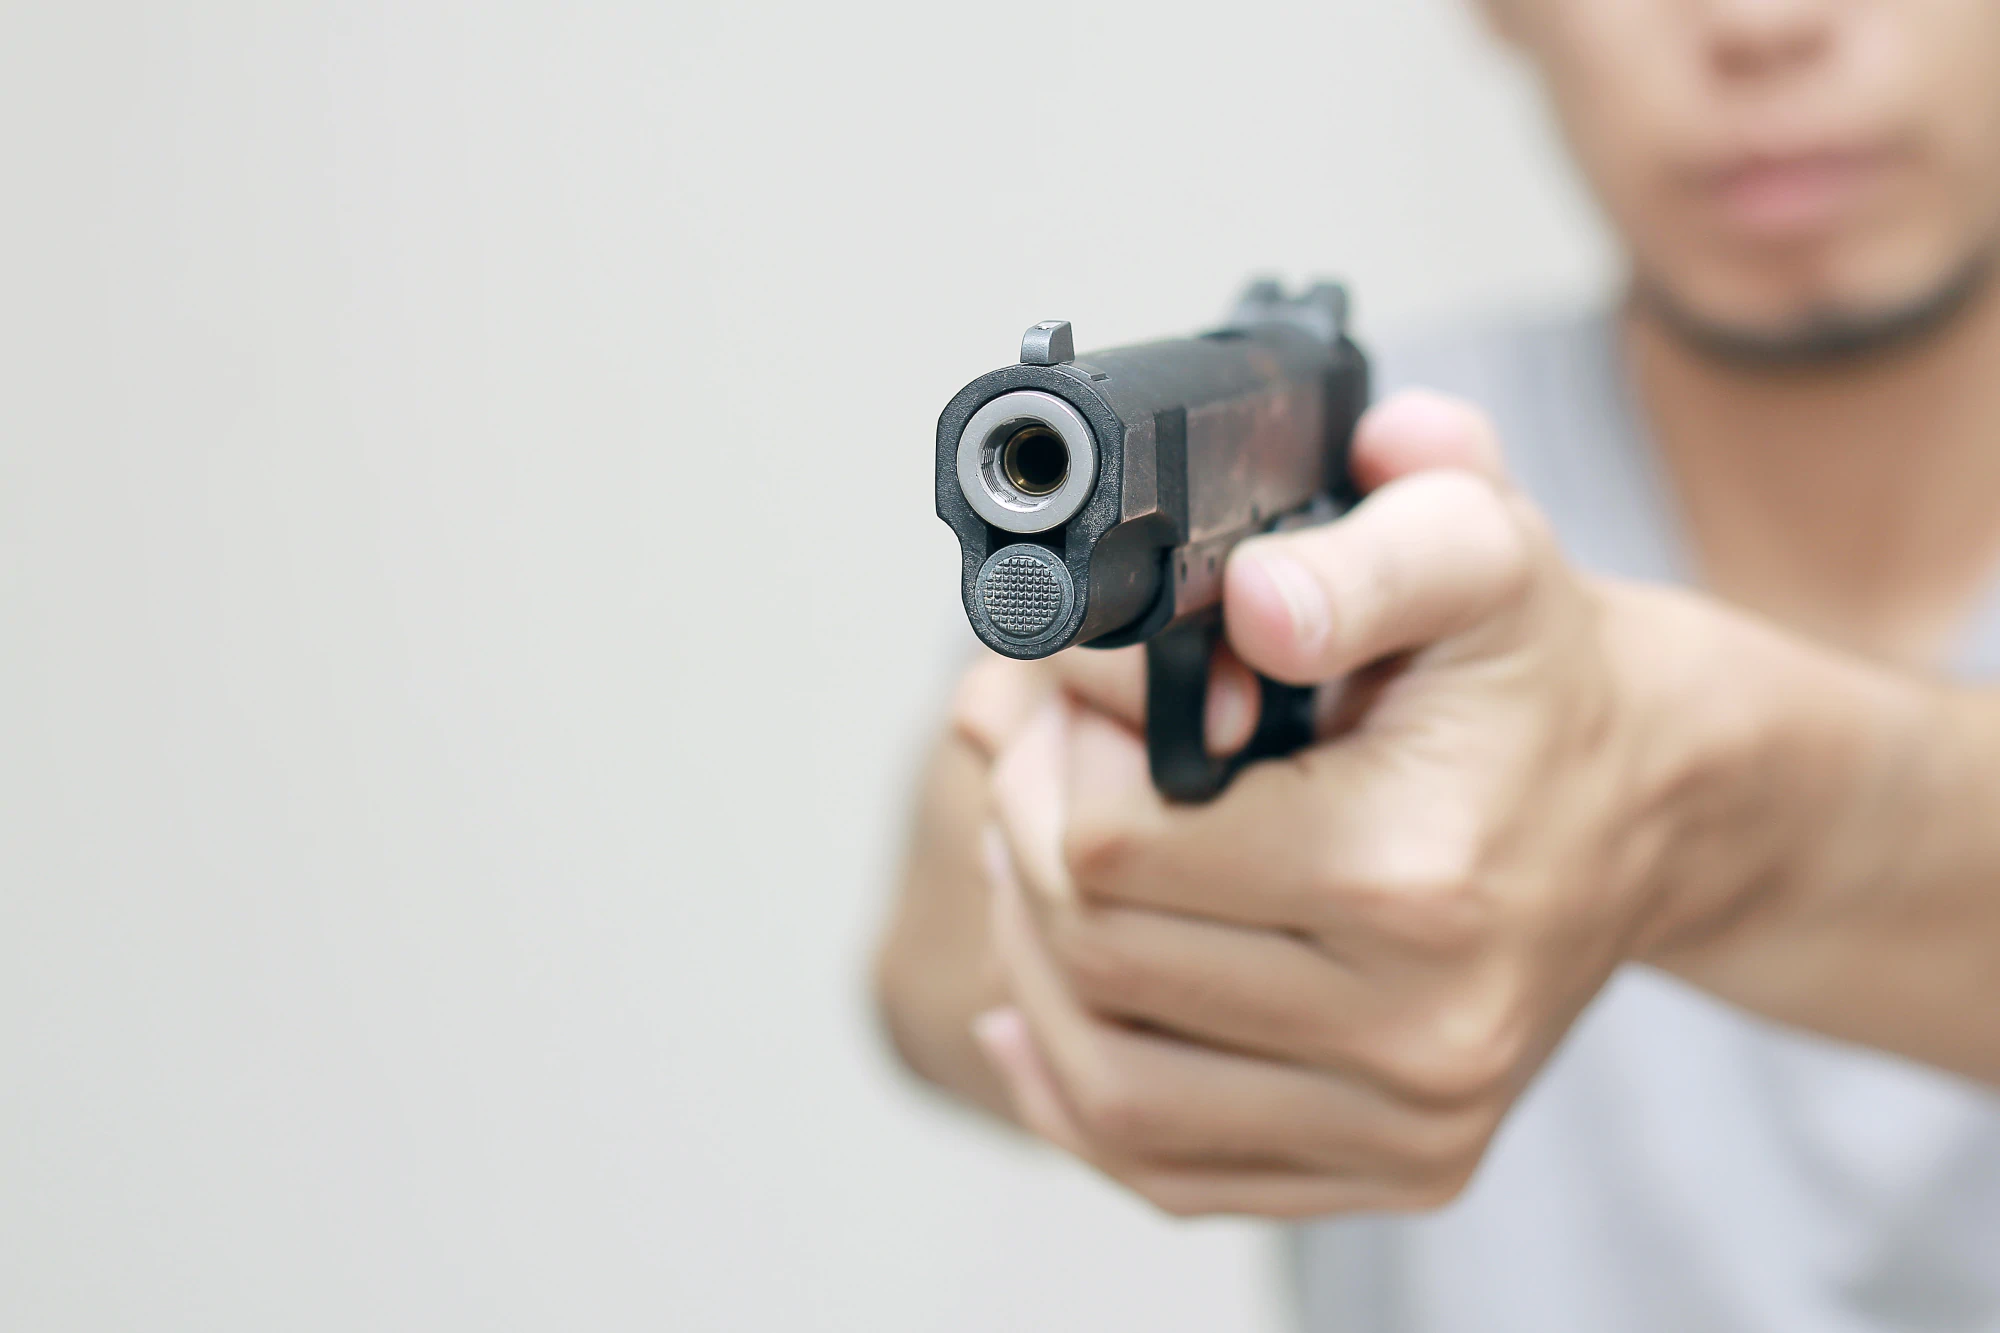 Out of focus man in a white t-shirt points a pistol toward the camera.